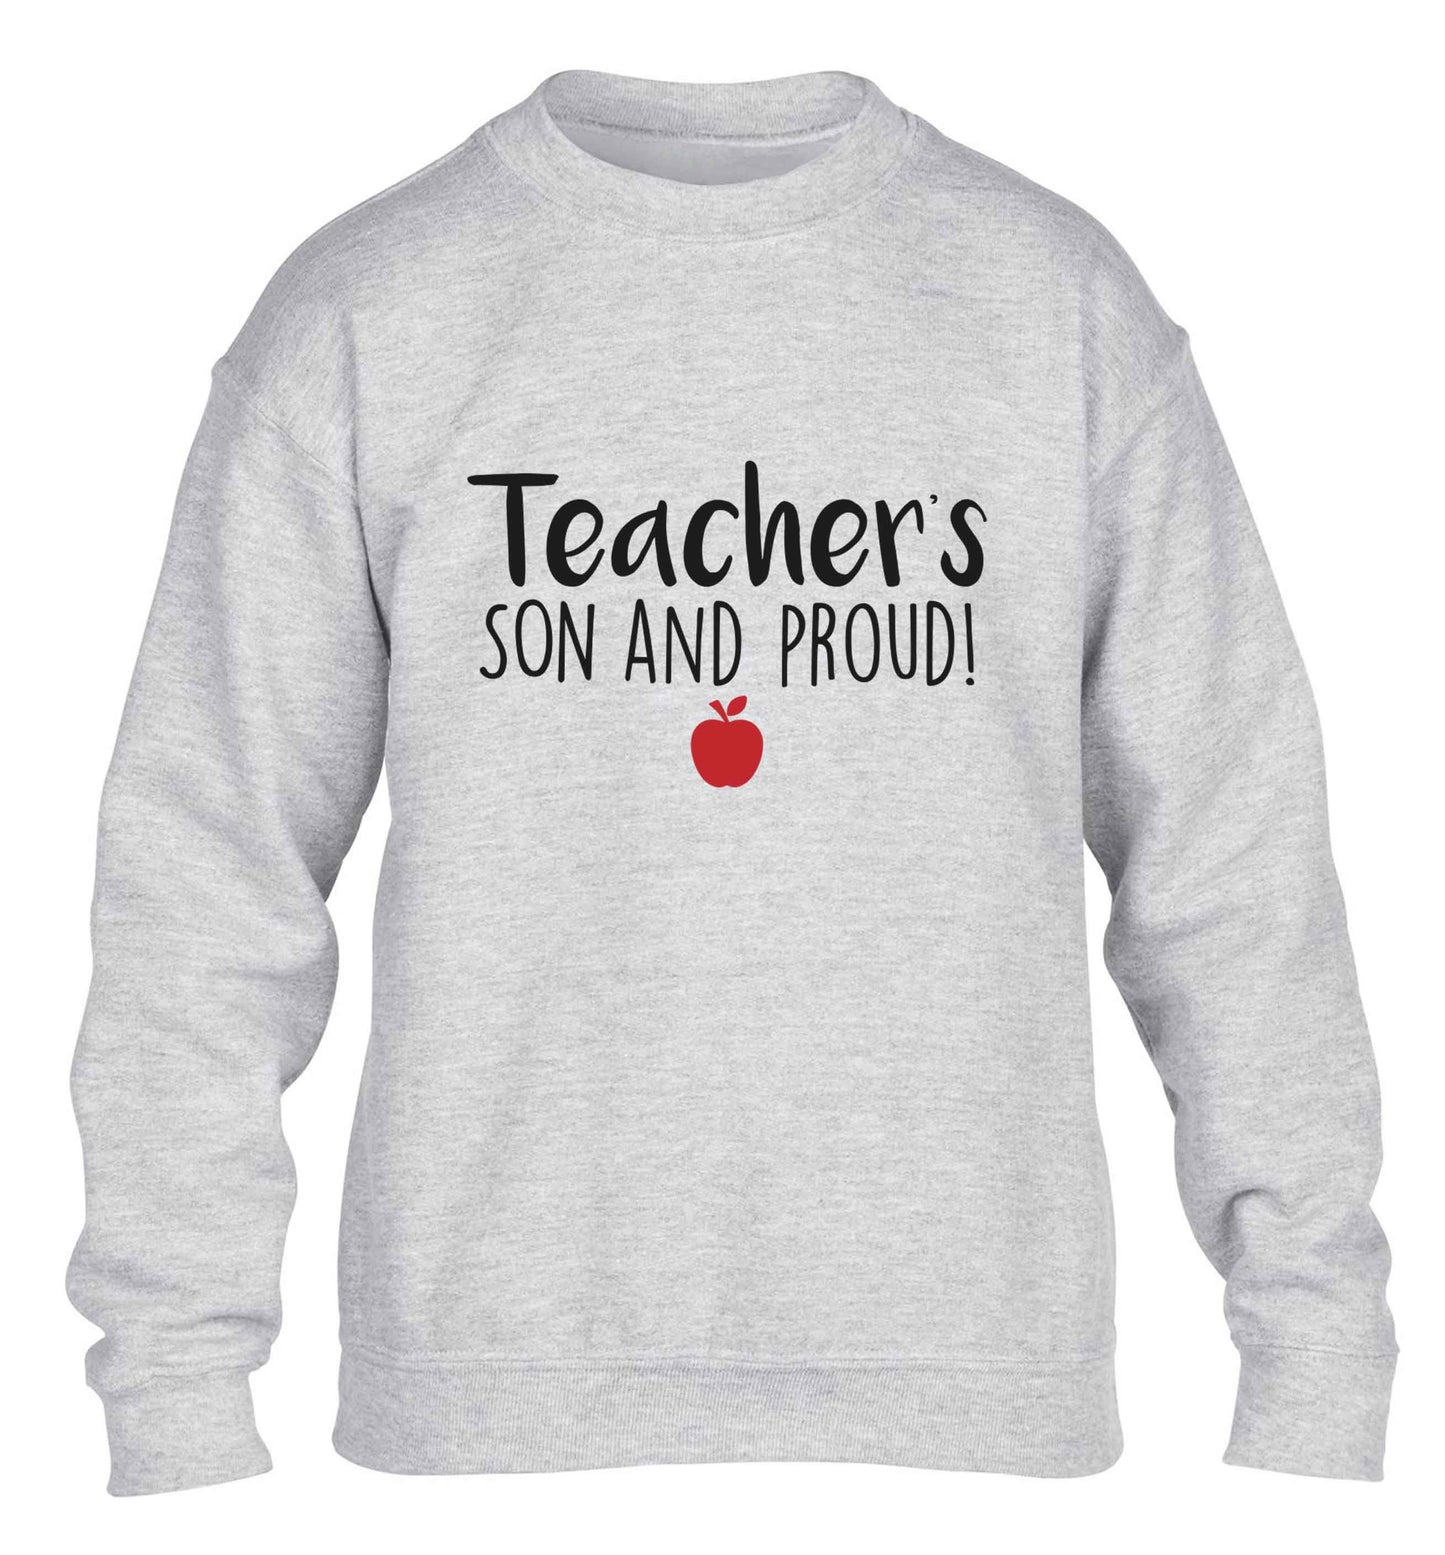 Teachers son and proud children's grey sweater 12-13 Years